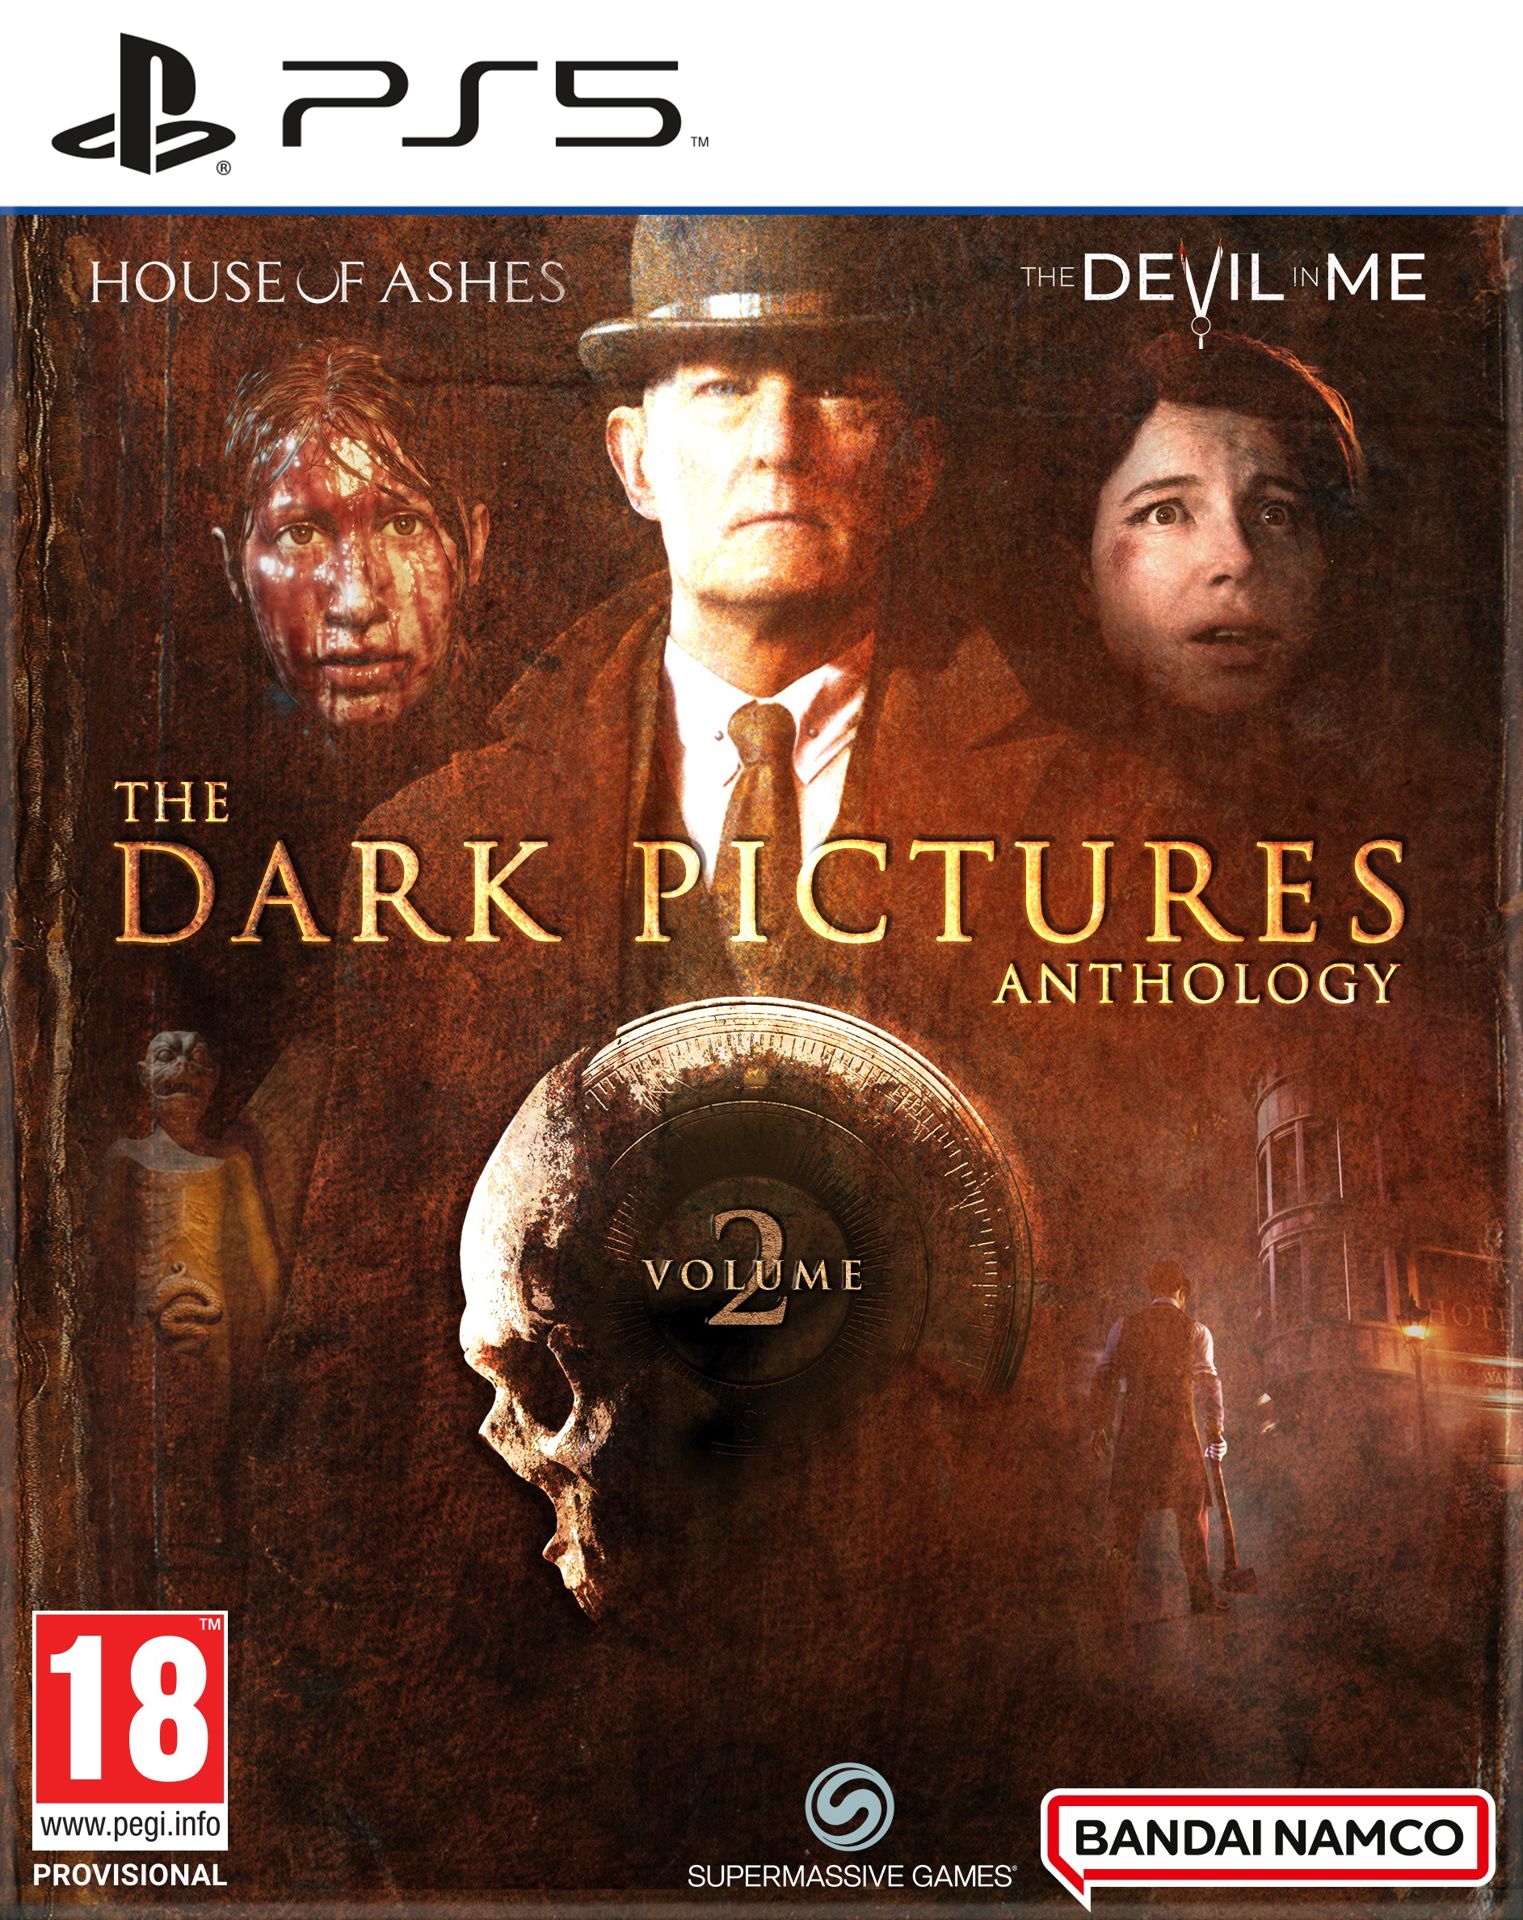 THE DARK PICTURES ANTHOLOGY: VOLUME 2